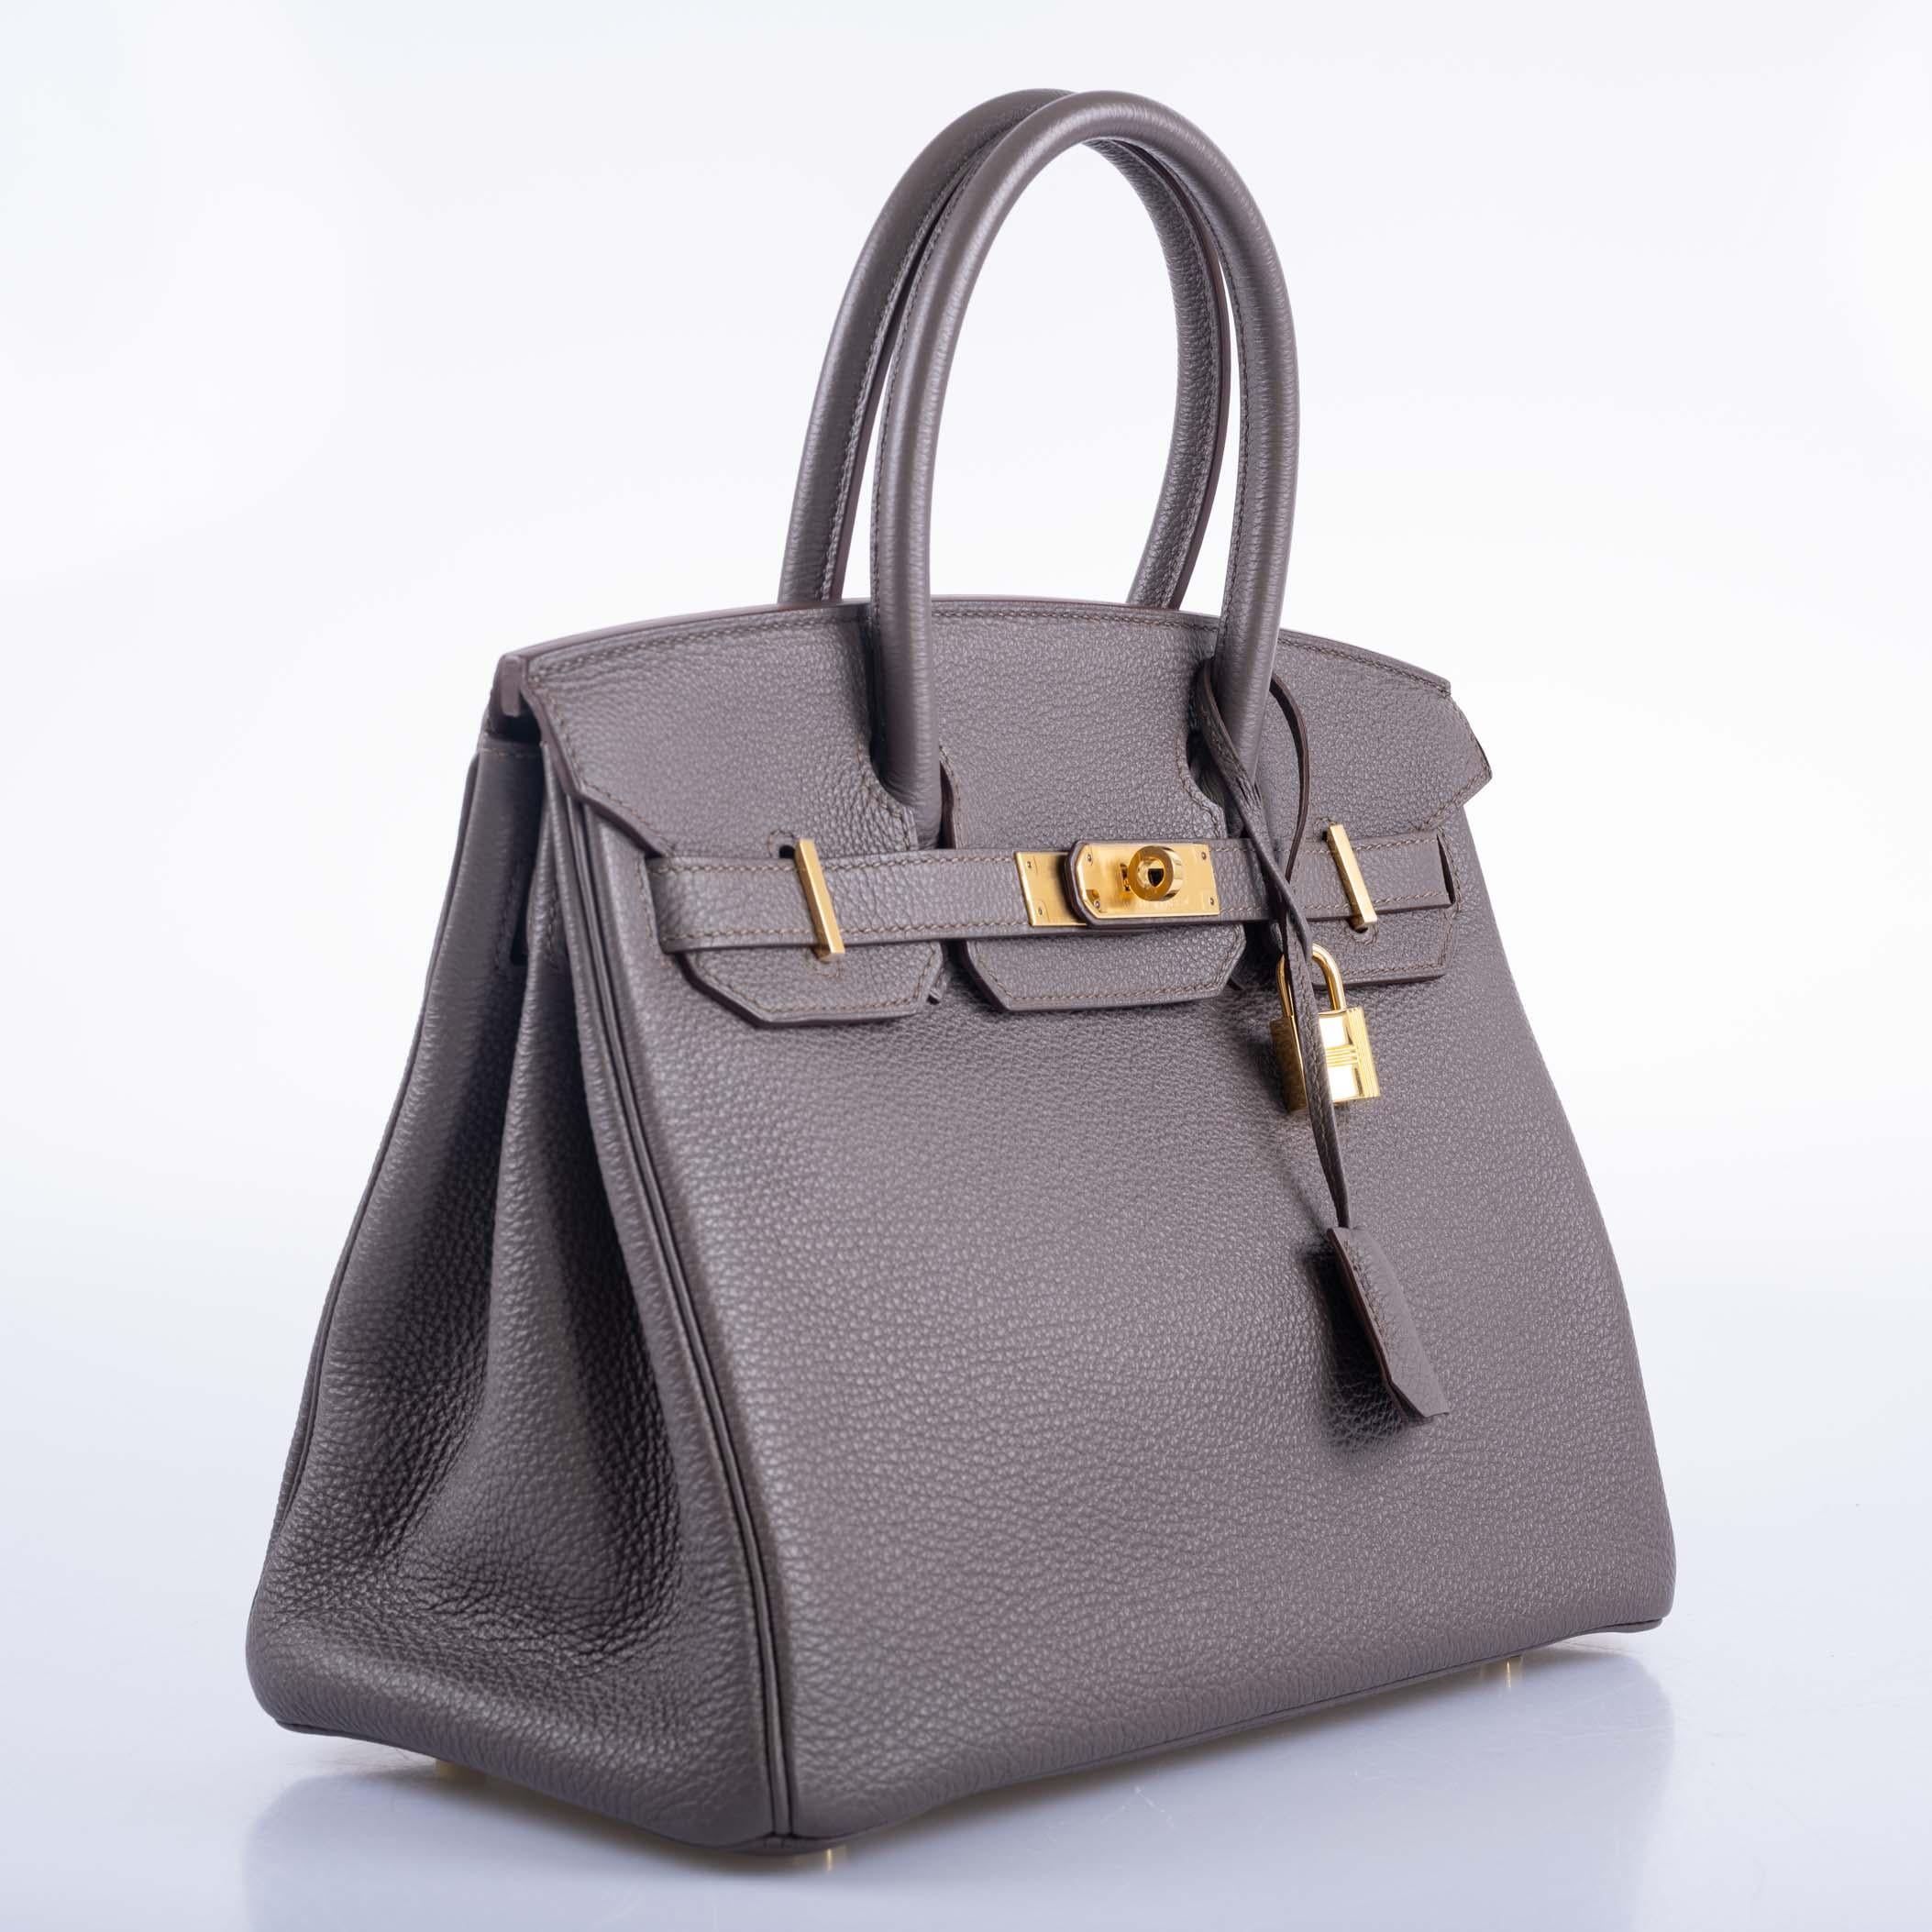 Every discerning woman with a taste for luxury deserves to have a signature Birkin in her collection. The Hermès Birkin 30cm in the distinguished 'Etain' color is a truly remarkable choice. Its name, derived from the French word for 'tin', belies